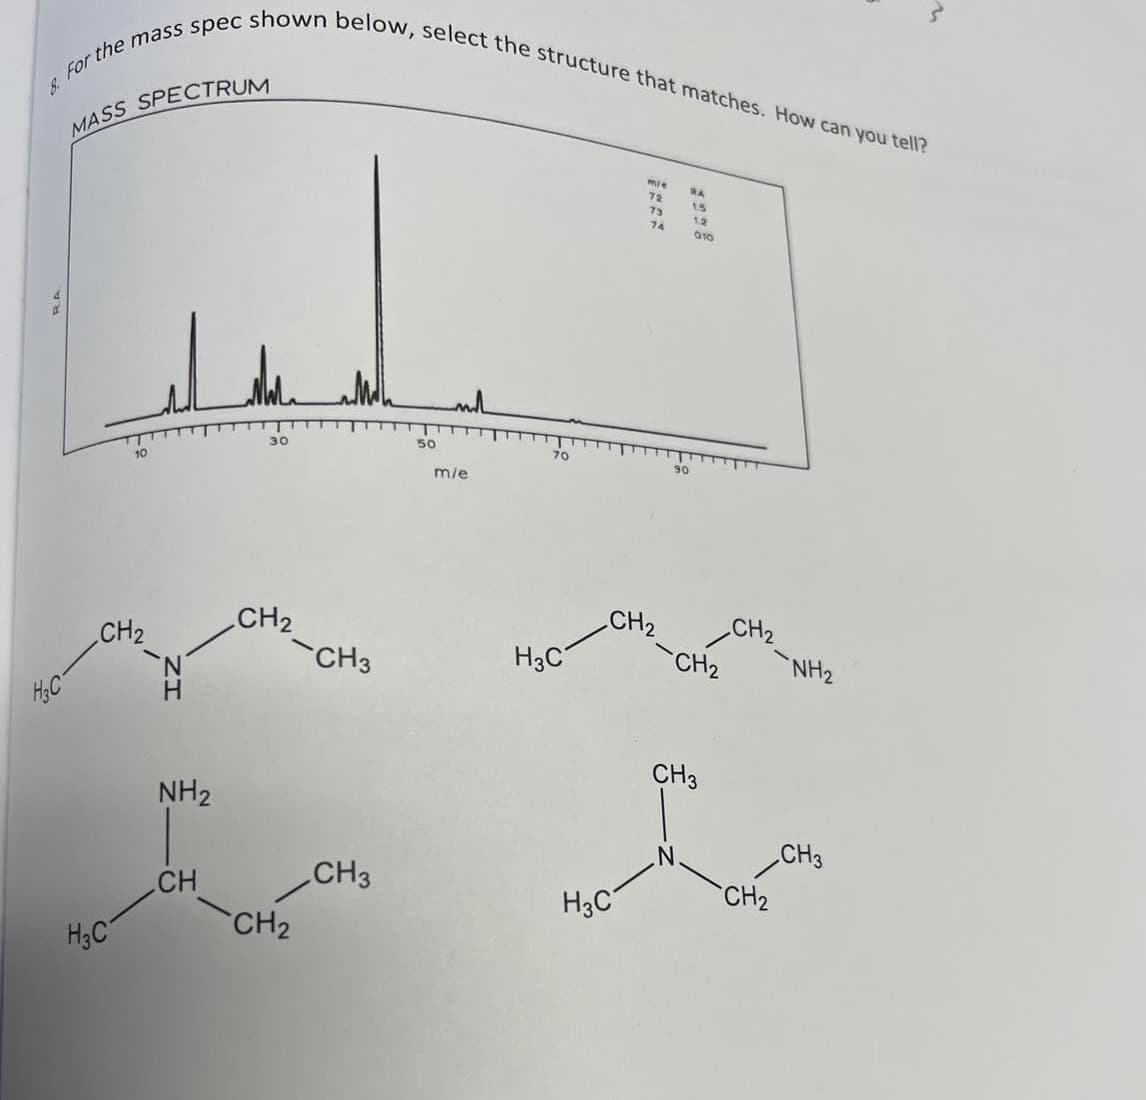 8. For the mass spec shown below, select the structure that matches. How can you tell?
MASS SPECTRUM
mie
RA
72
15
73
12
74
010
50
70
30
90
10
m/e
CH2
CH2
CH2
CH3
CH2
H3C°
CH2
NH2
H.
CH3
NH2
CH3
CH3
CH2
CH
H3C
CH2
H3C
